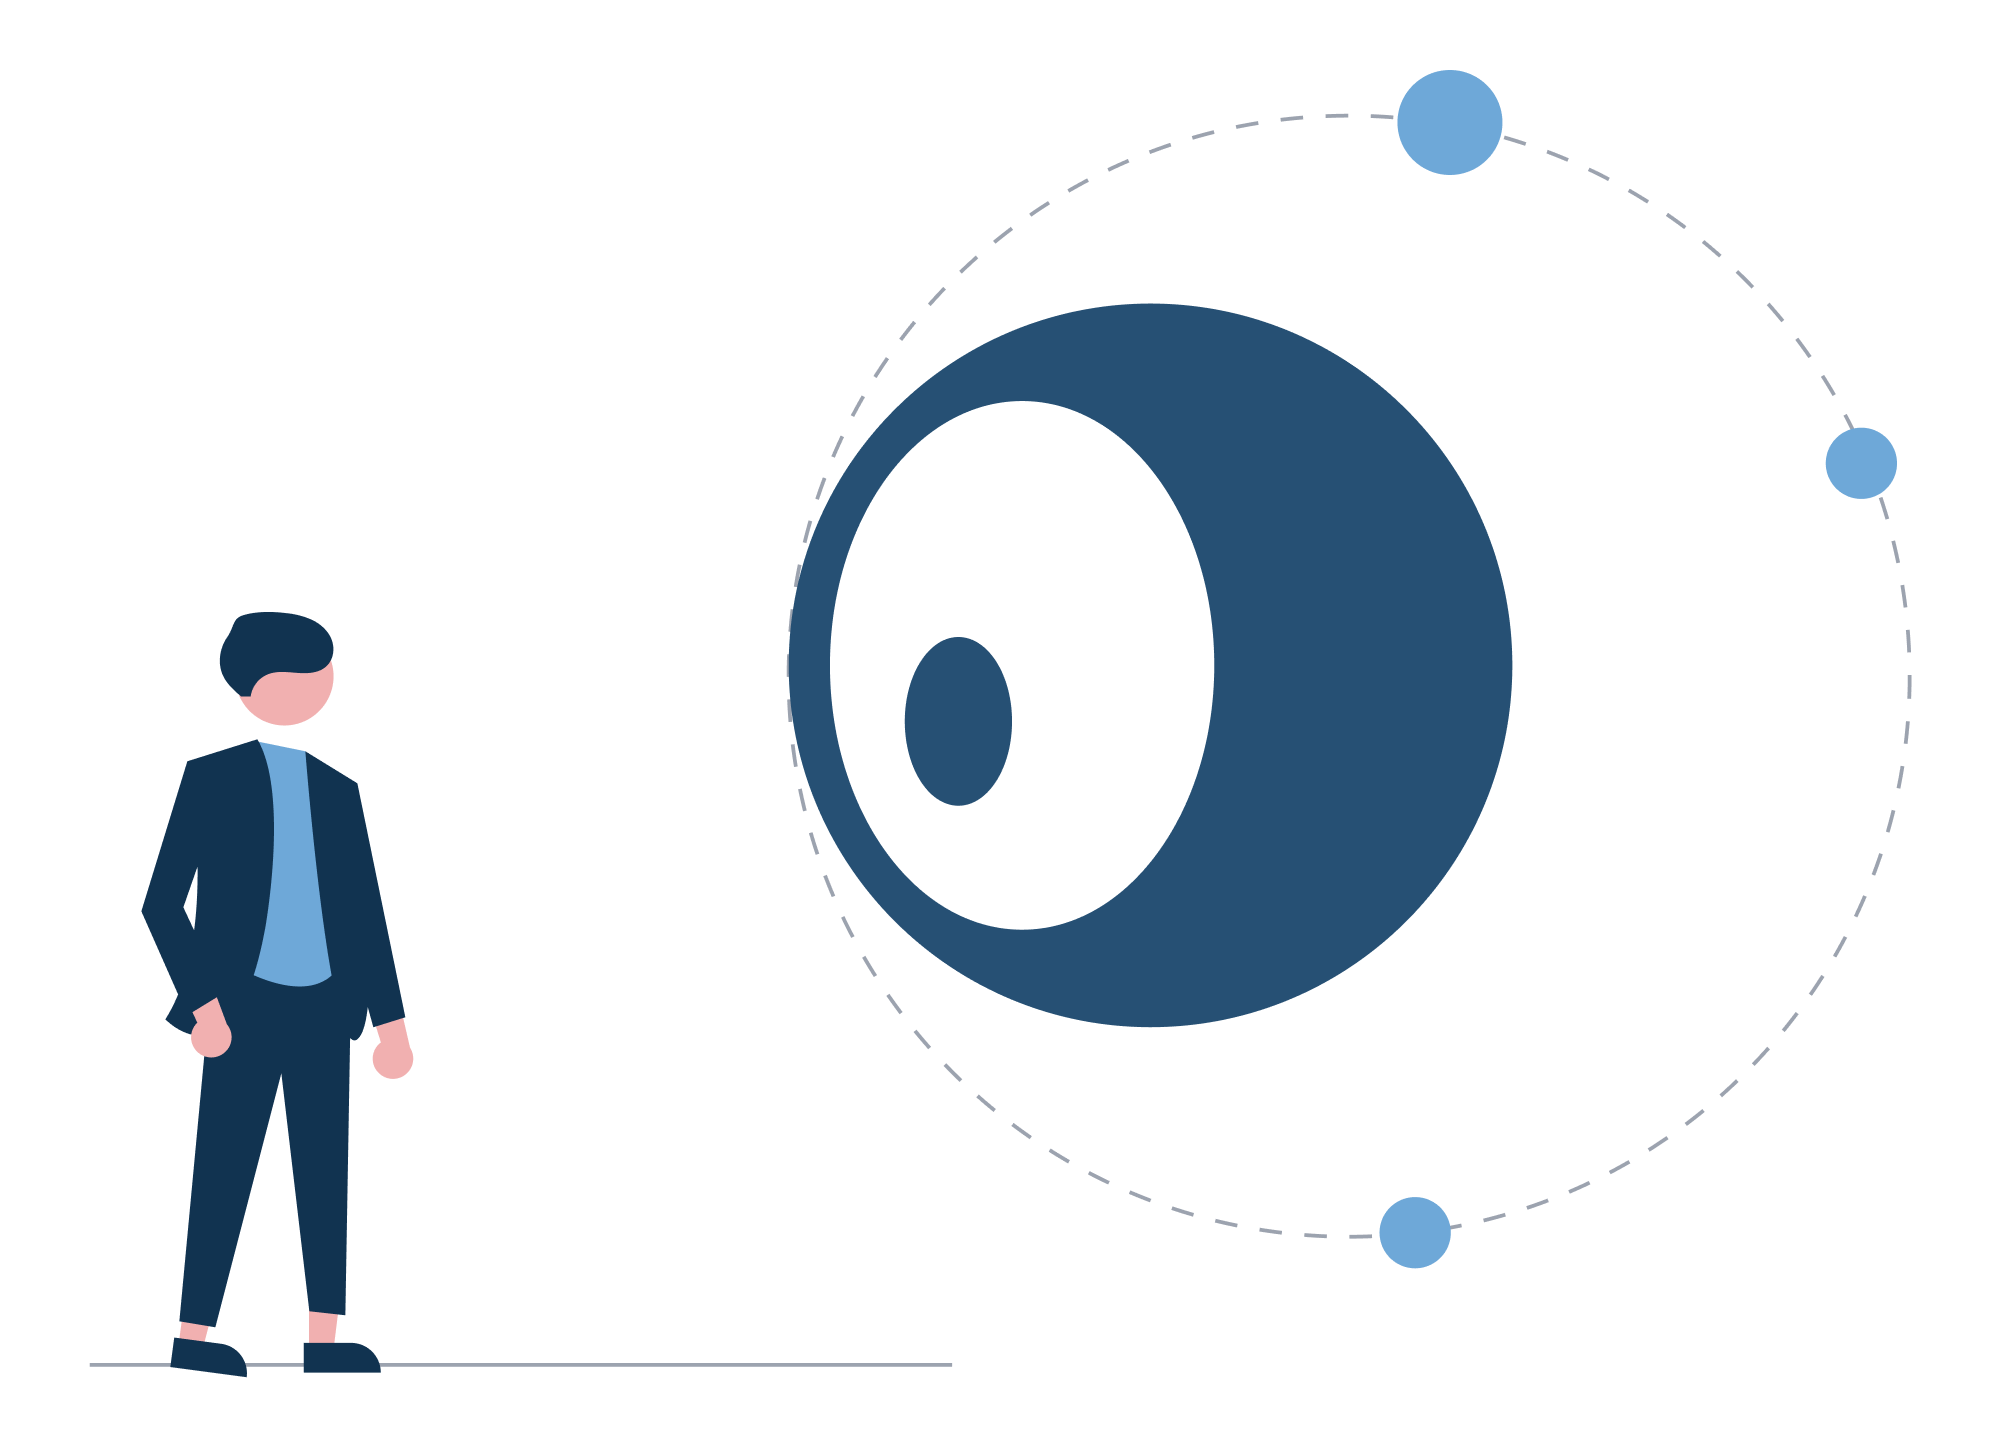 Illustration of a large eye watching a person